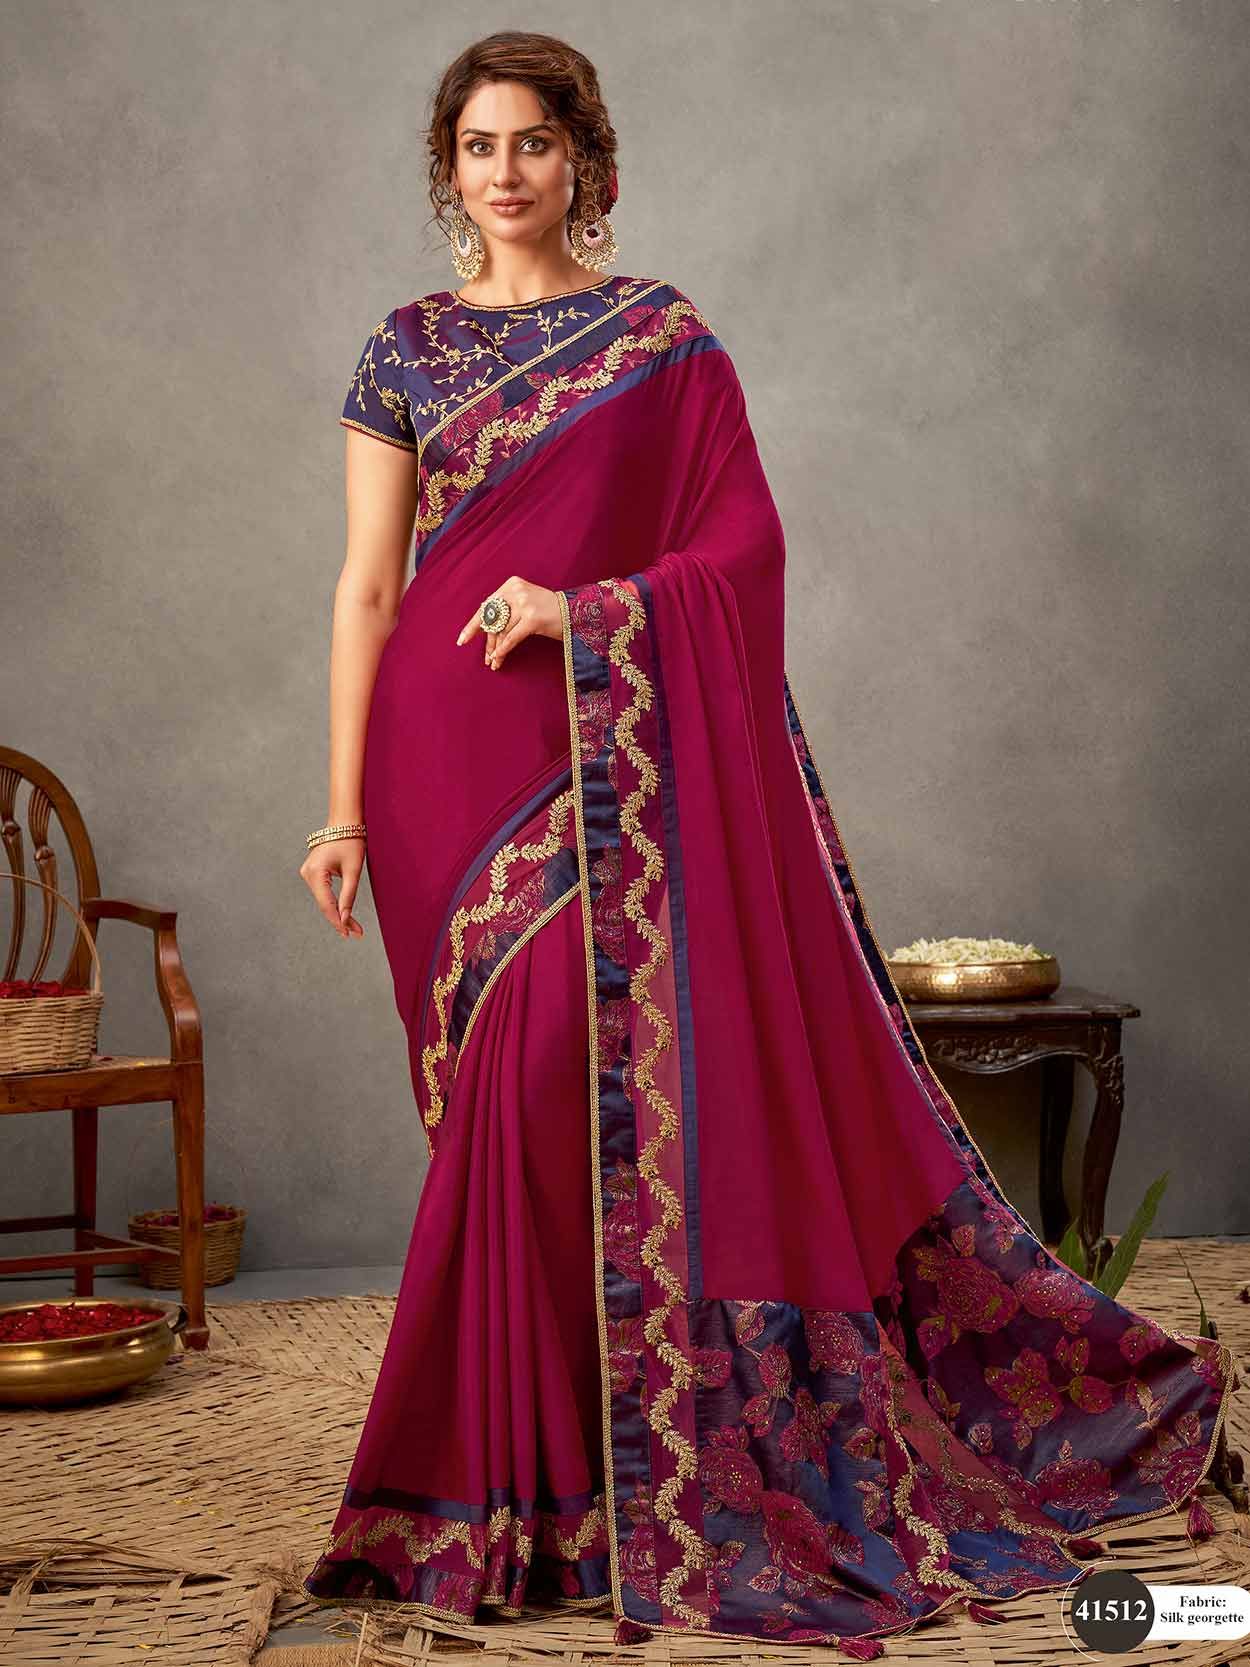 Party-Perfect Sarees in 2023: Embrace the Top Trends and Elevate Your Style, by Angela Merkela